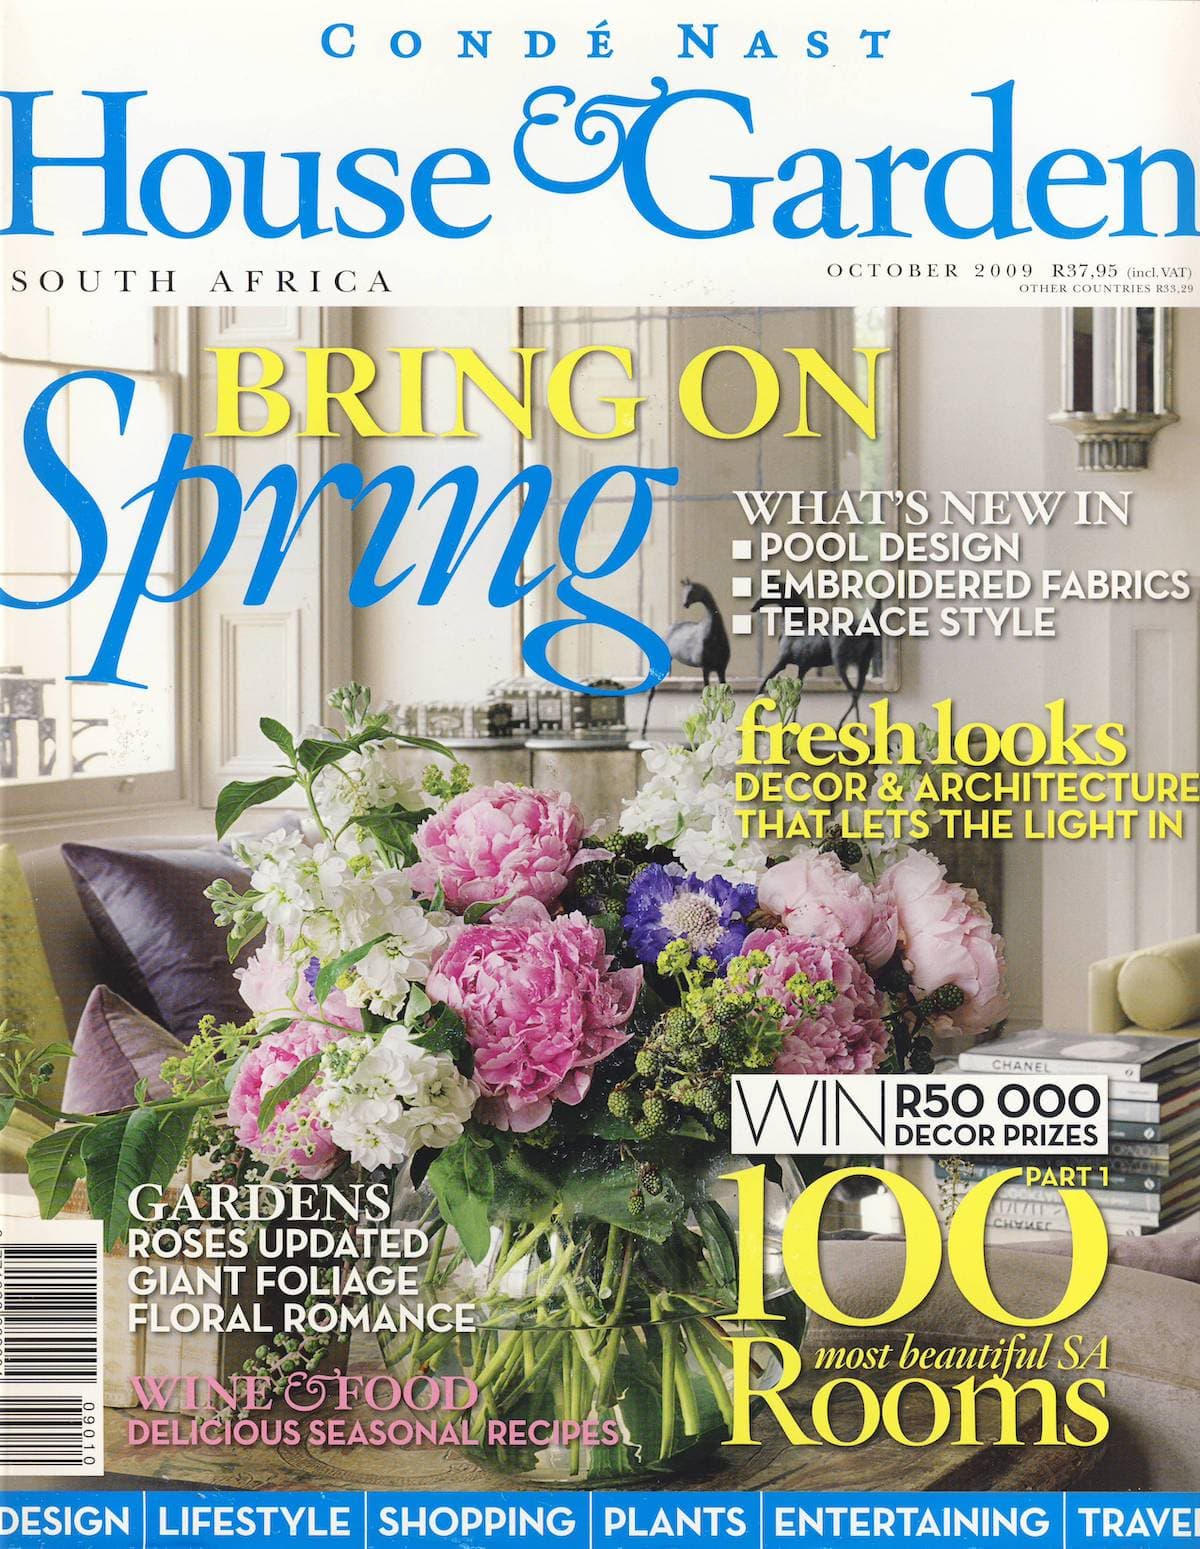 2009 House & Garden Most Beautiful Rooms Cover